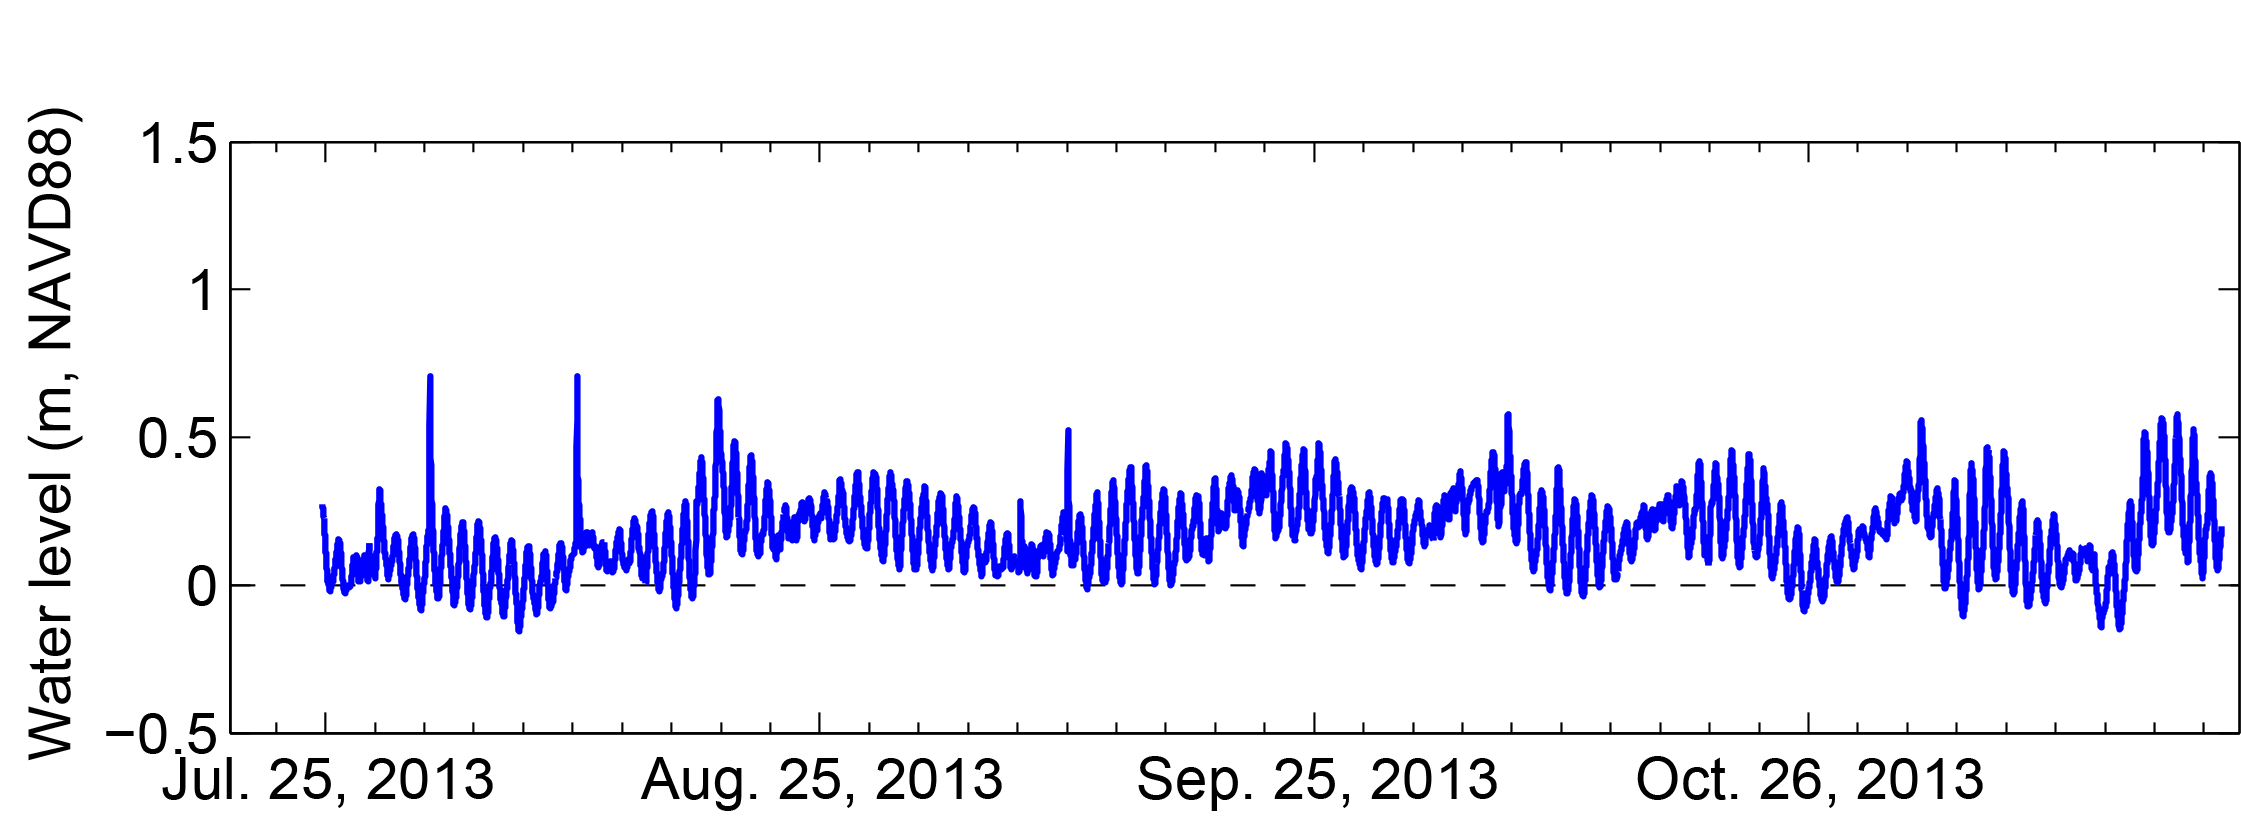 Water-level time series from an Onset Hobo U20 pressure logger mounted in a buried well at site 976 on Dauphin Island, Alabama, in 2013.